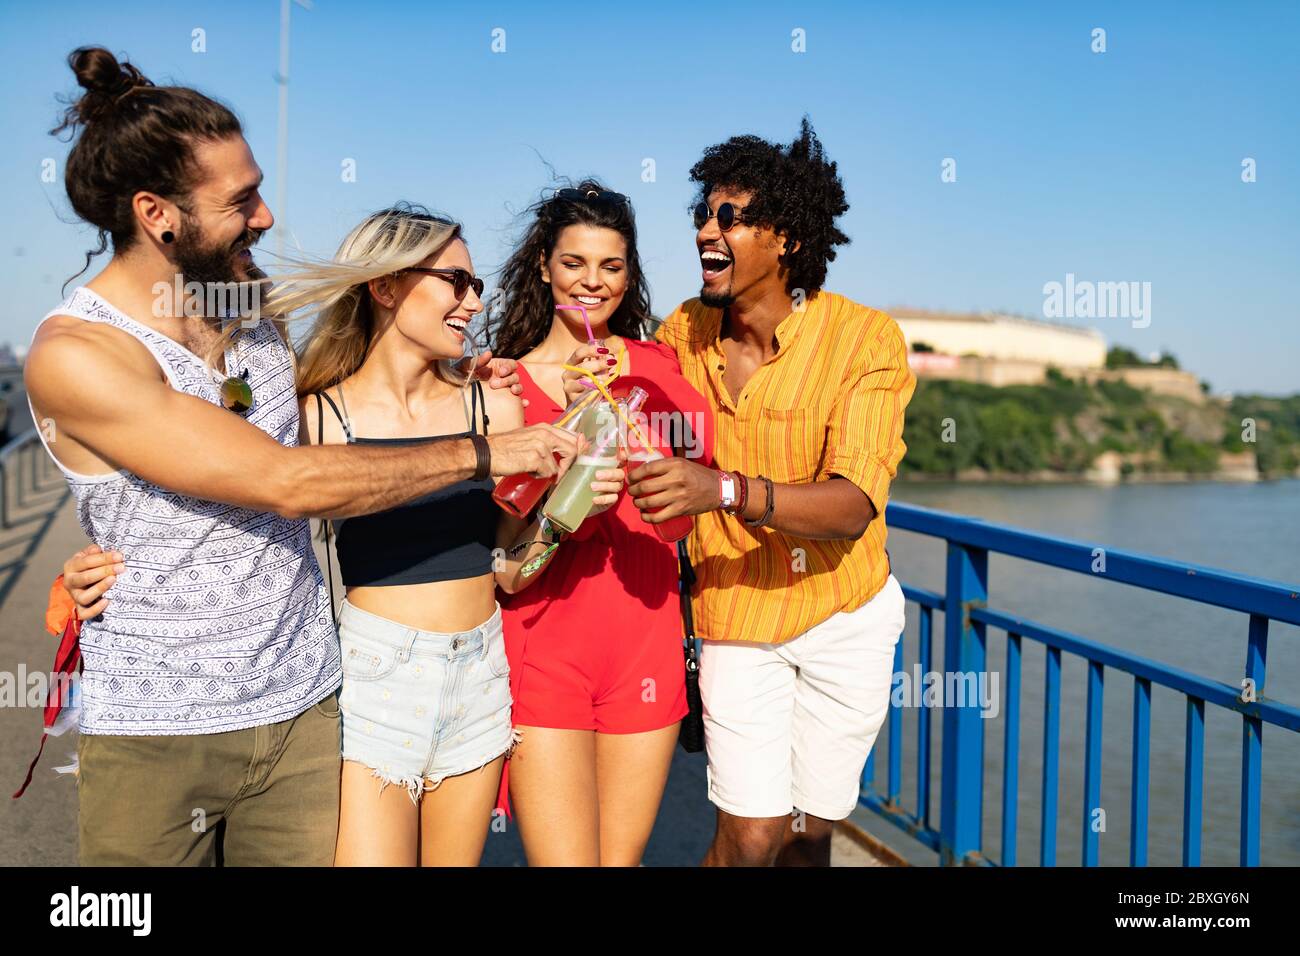 Group of friends having fun and hanging out outdoors Stock Photo